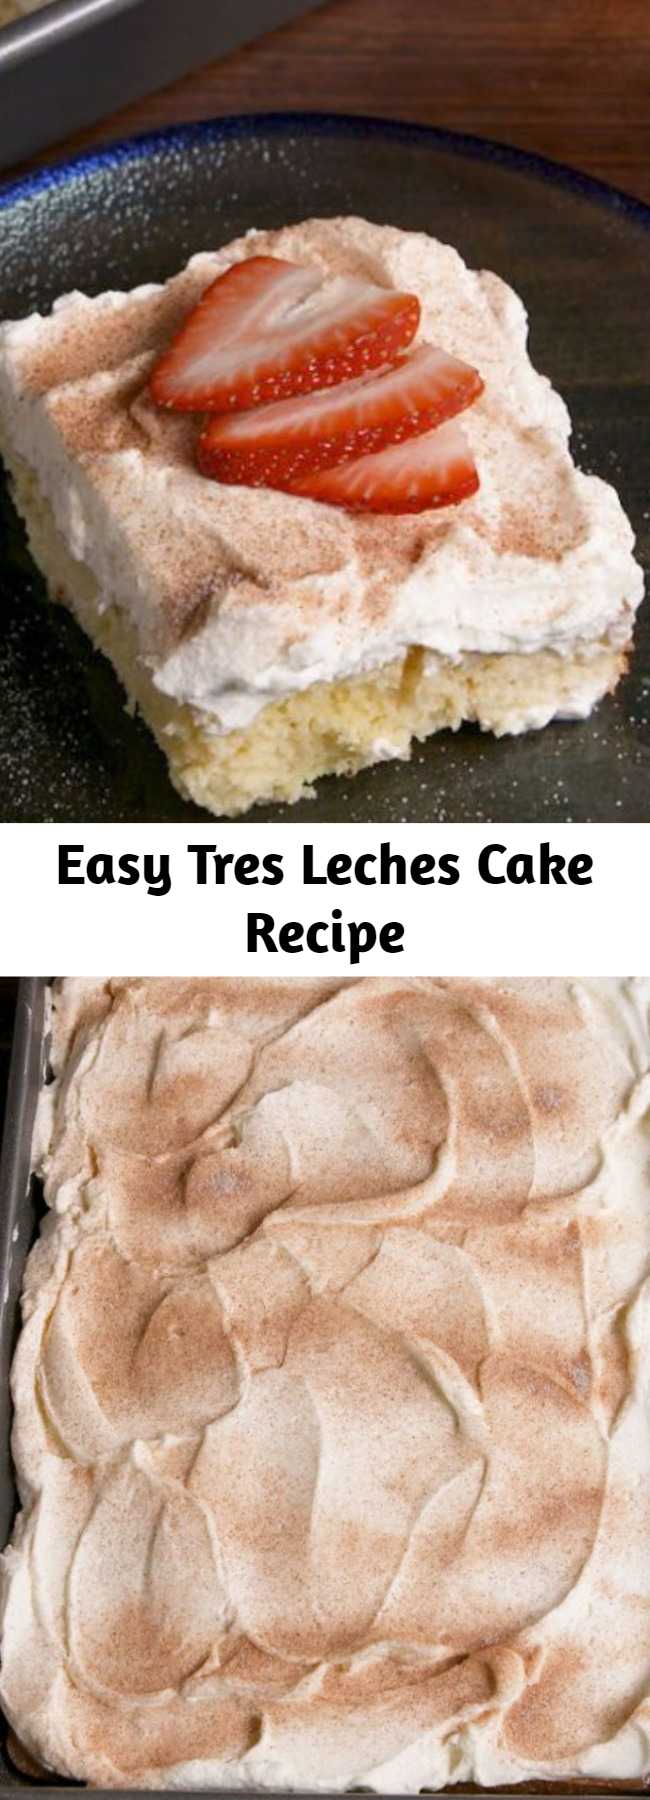 Easy Tres Leches Cake Recipe - This Tres Leches Cake recipe is the perfect light and airy dessert and a Latin American favorite. Tres Leches means "three milks" and is a sponge cake that contains three different types of milks. It's basically the original poke cake. #food #easyrecipe #cake #dessert #baking